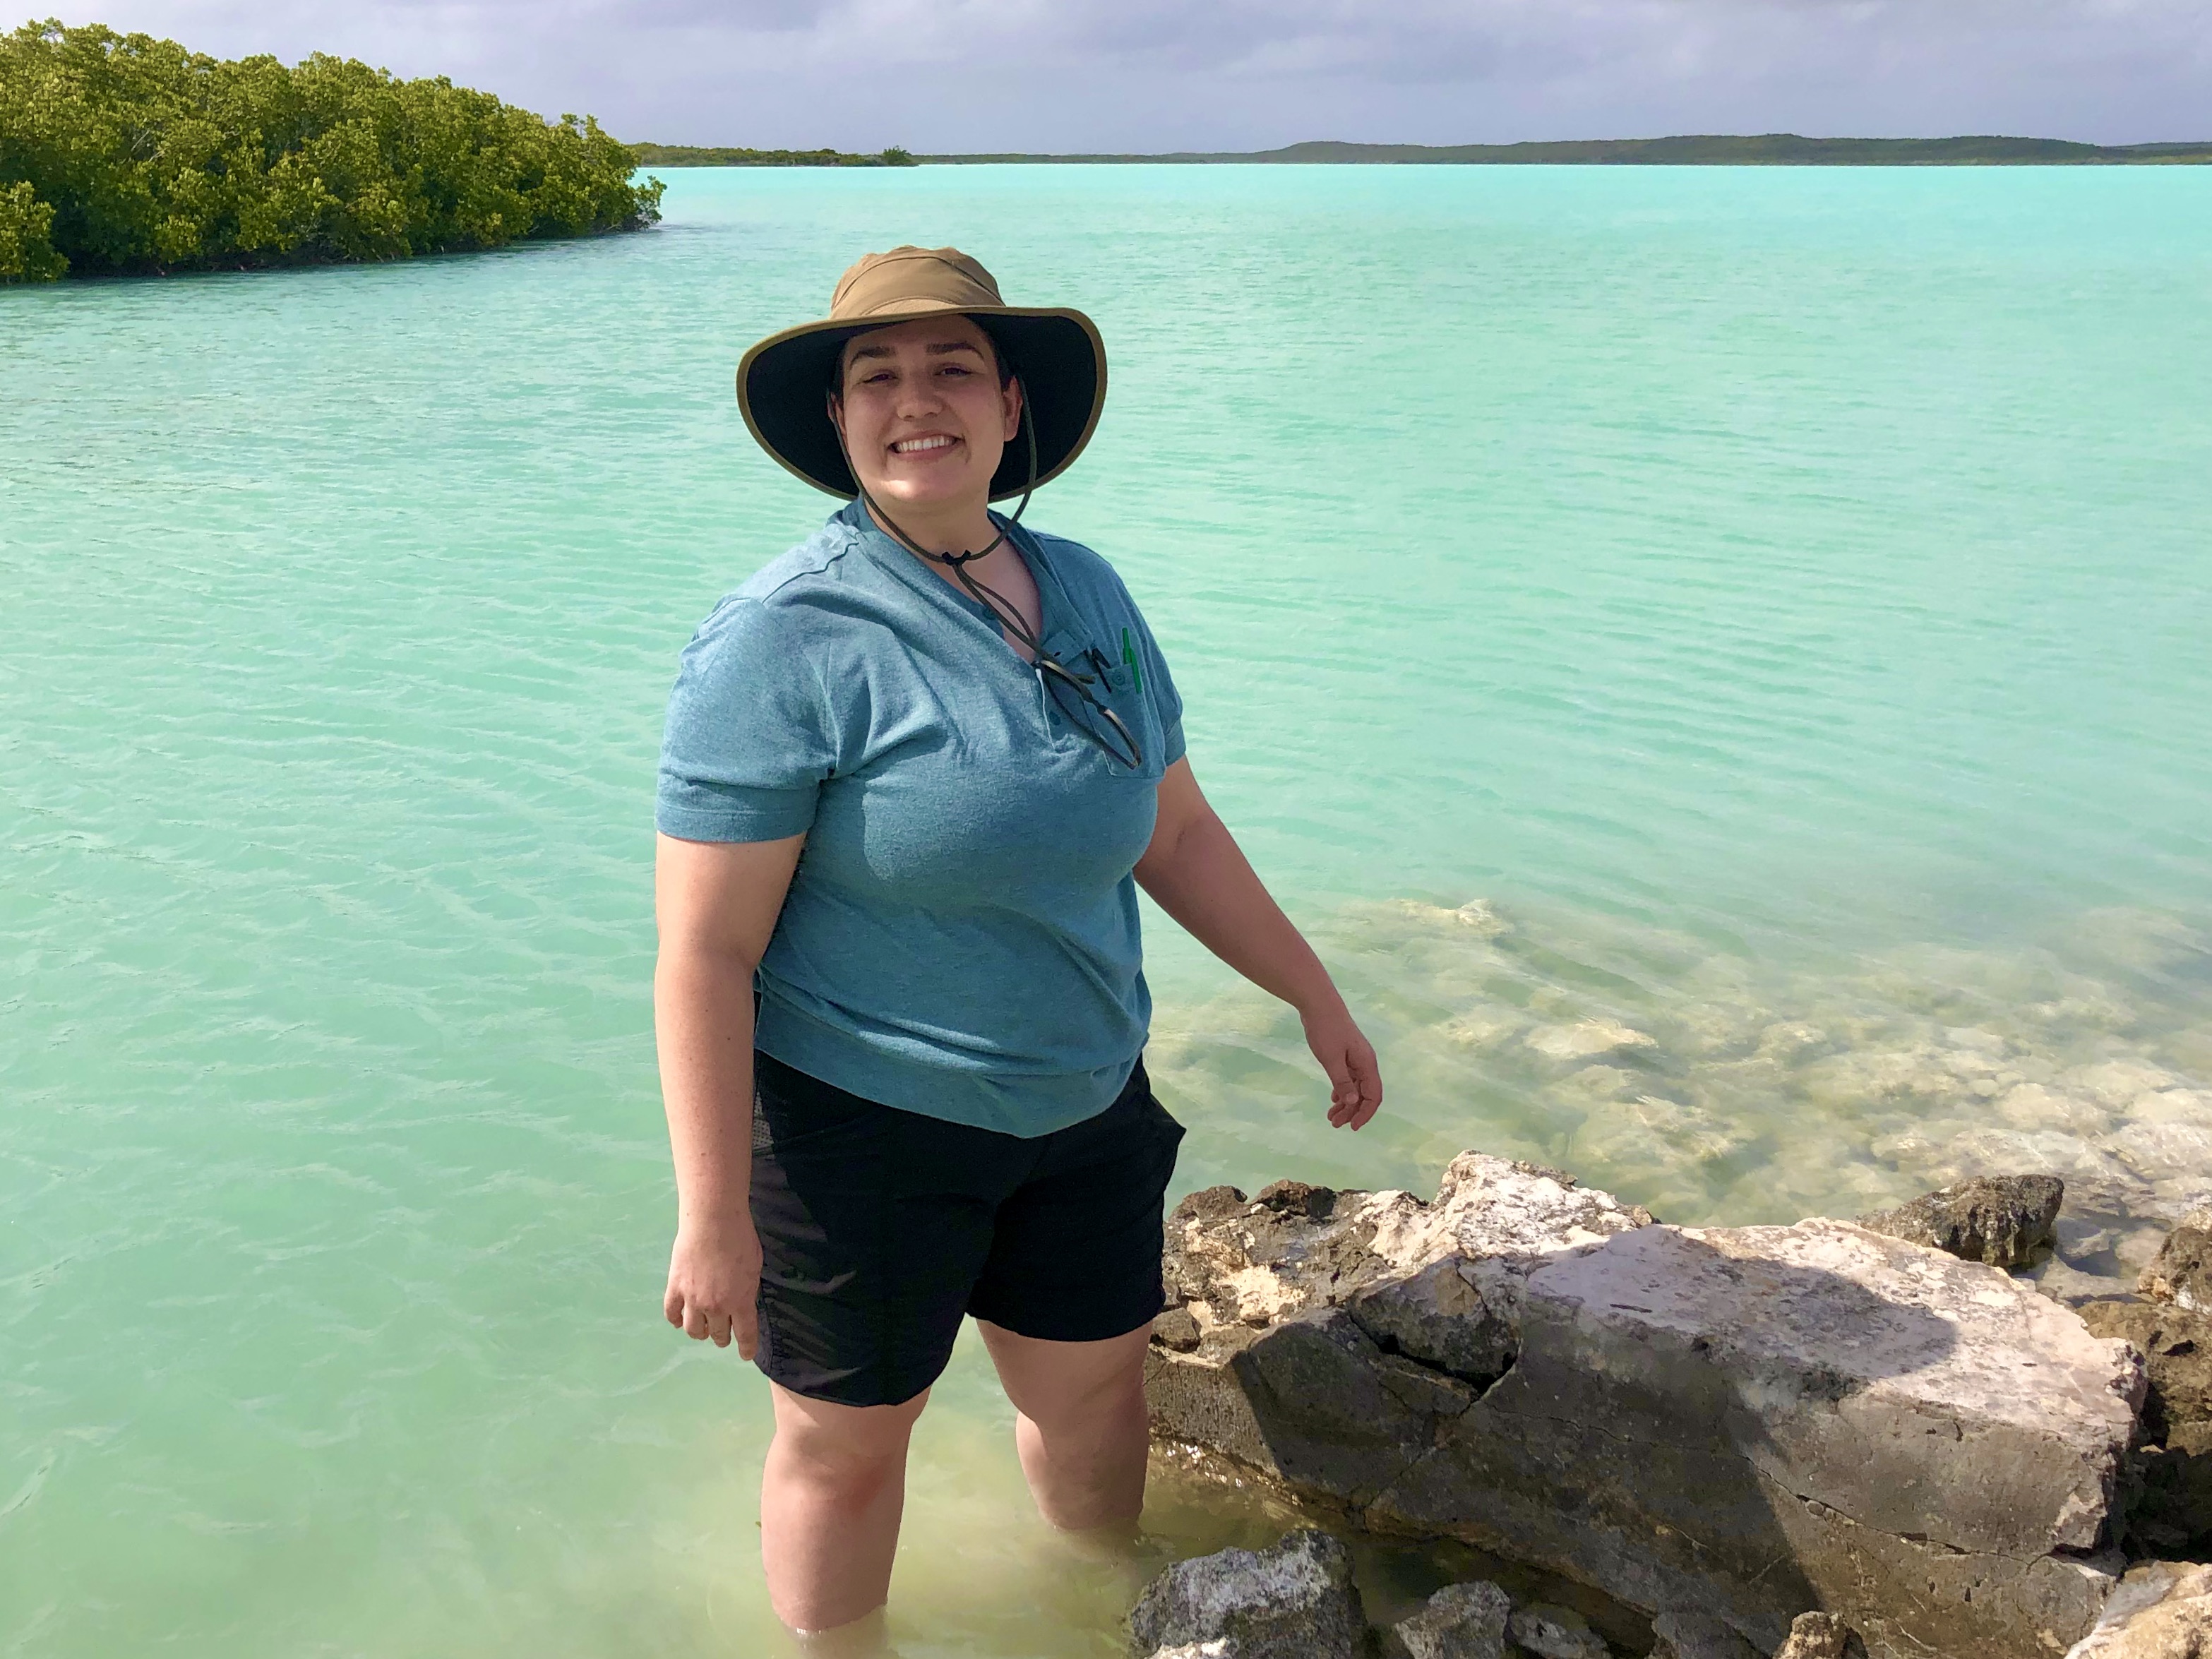 Casey smiling at the camera standing in a lagoon